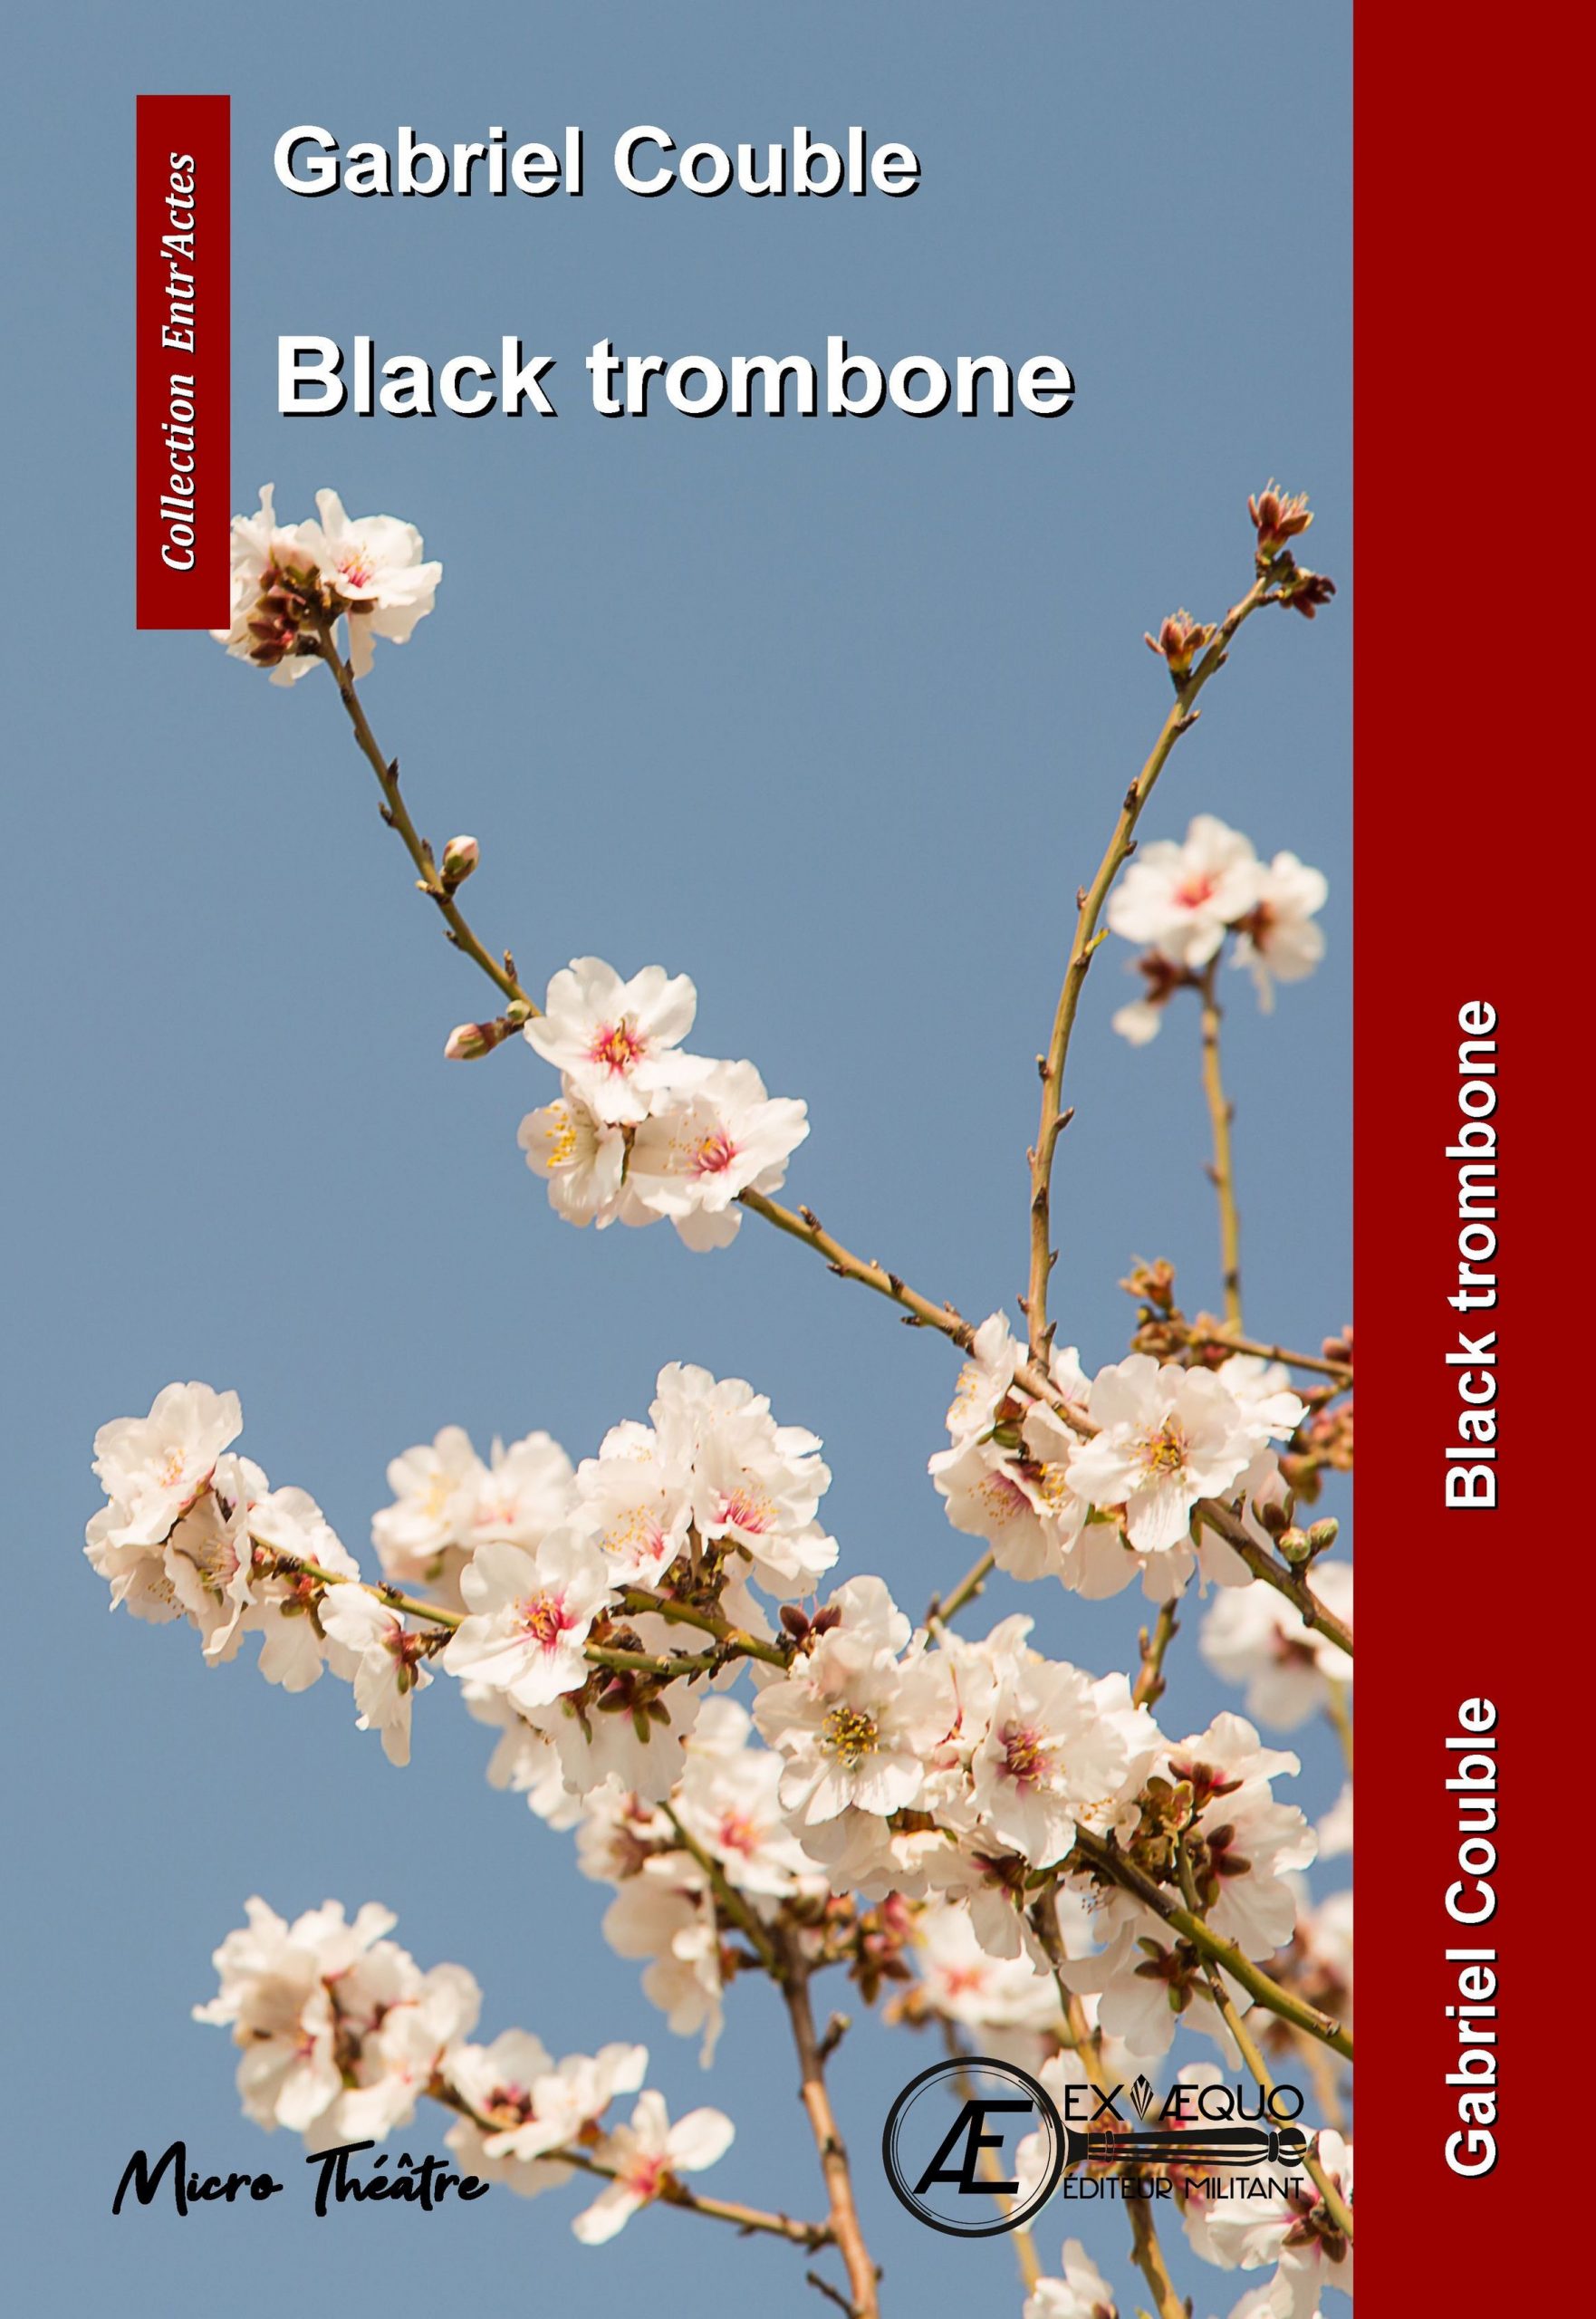 You are currently viewing Black trombone